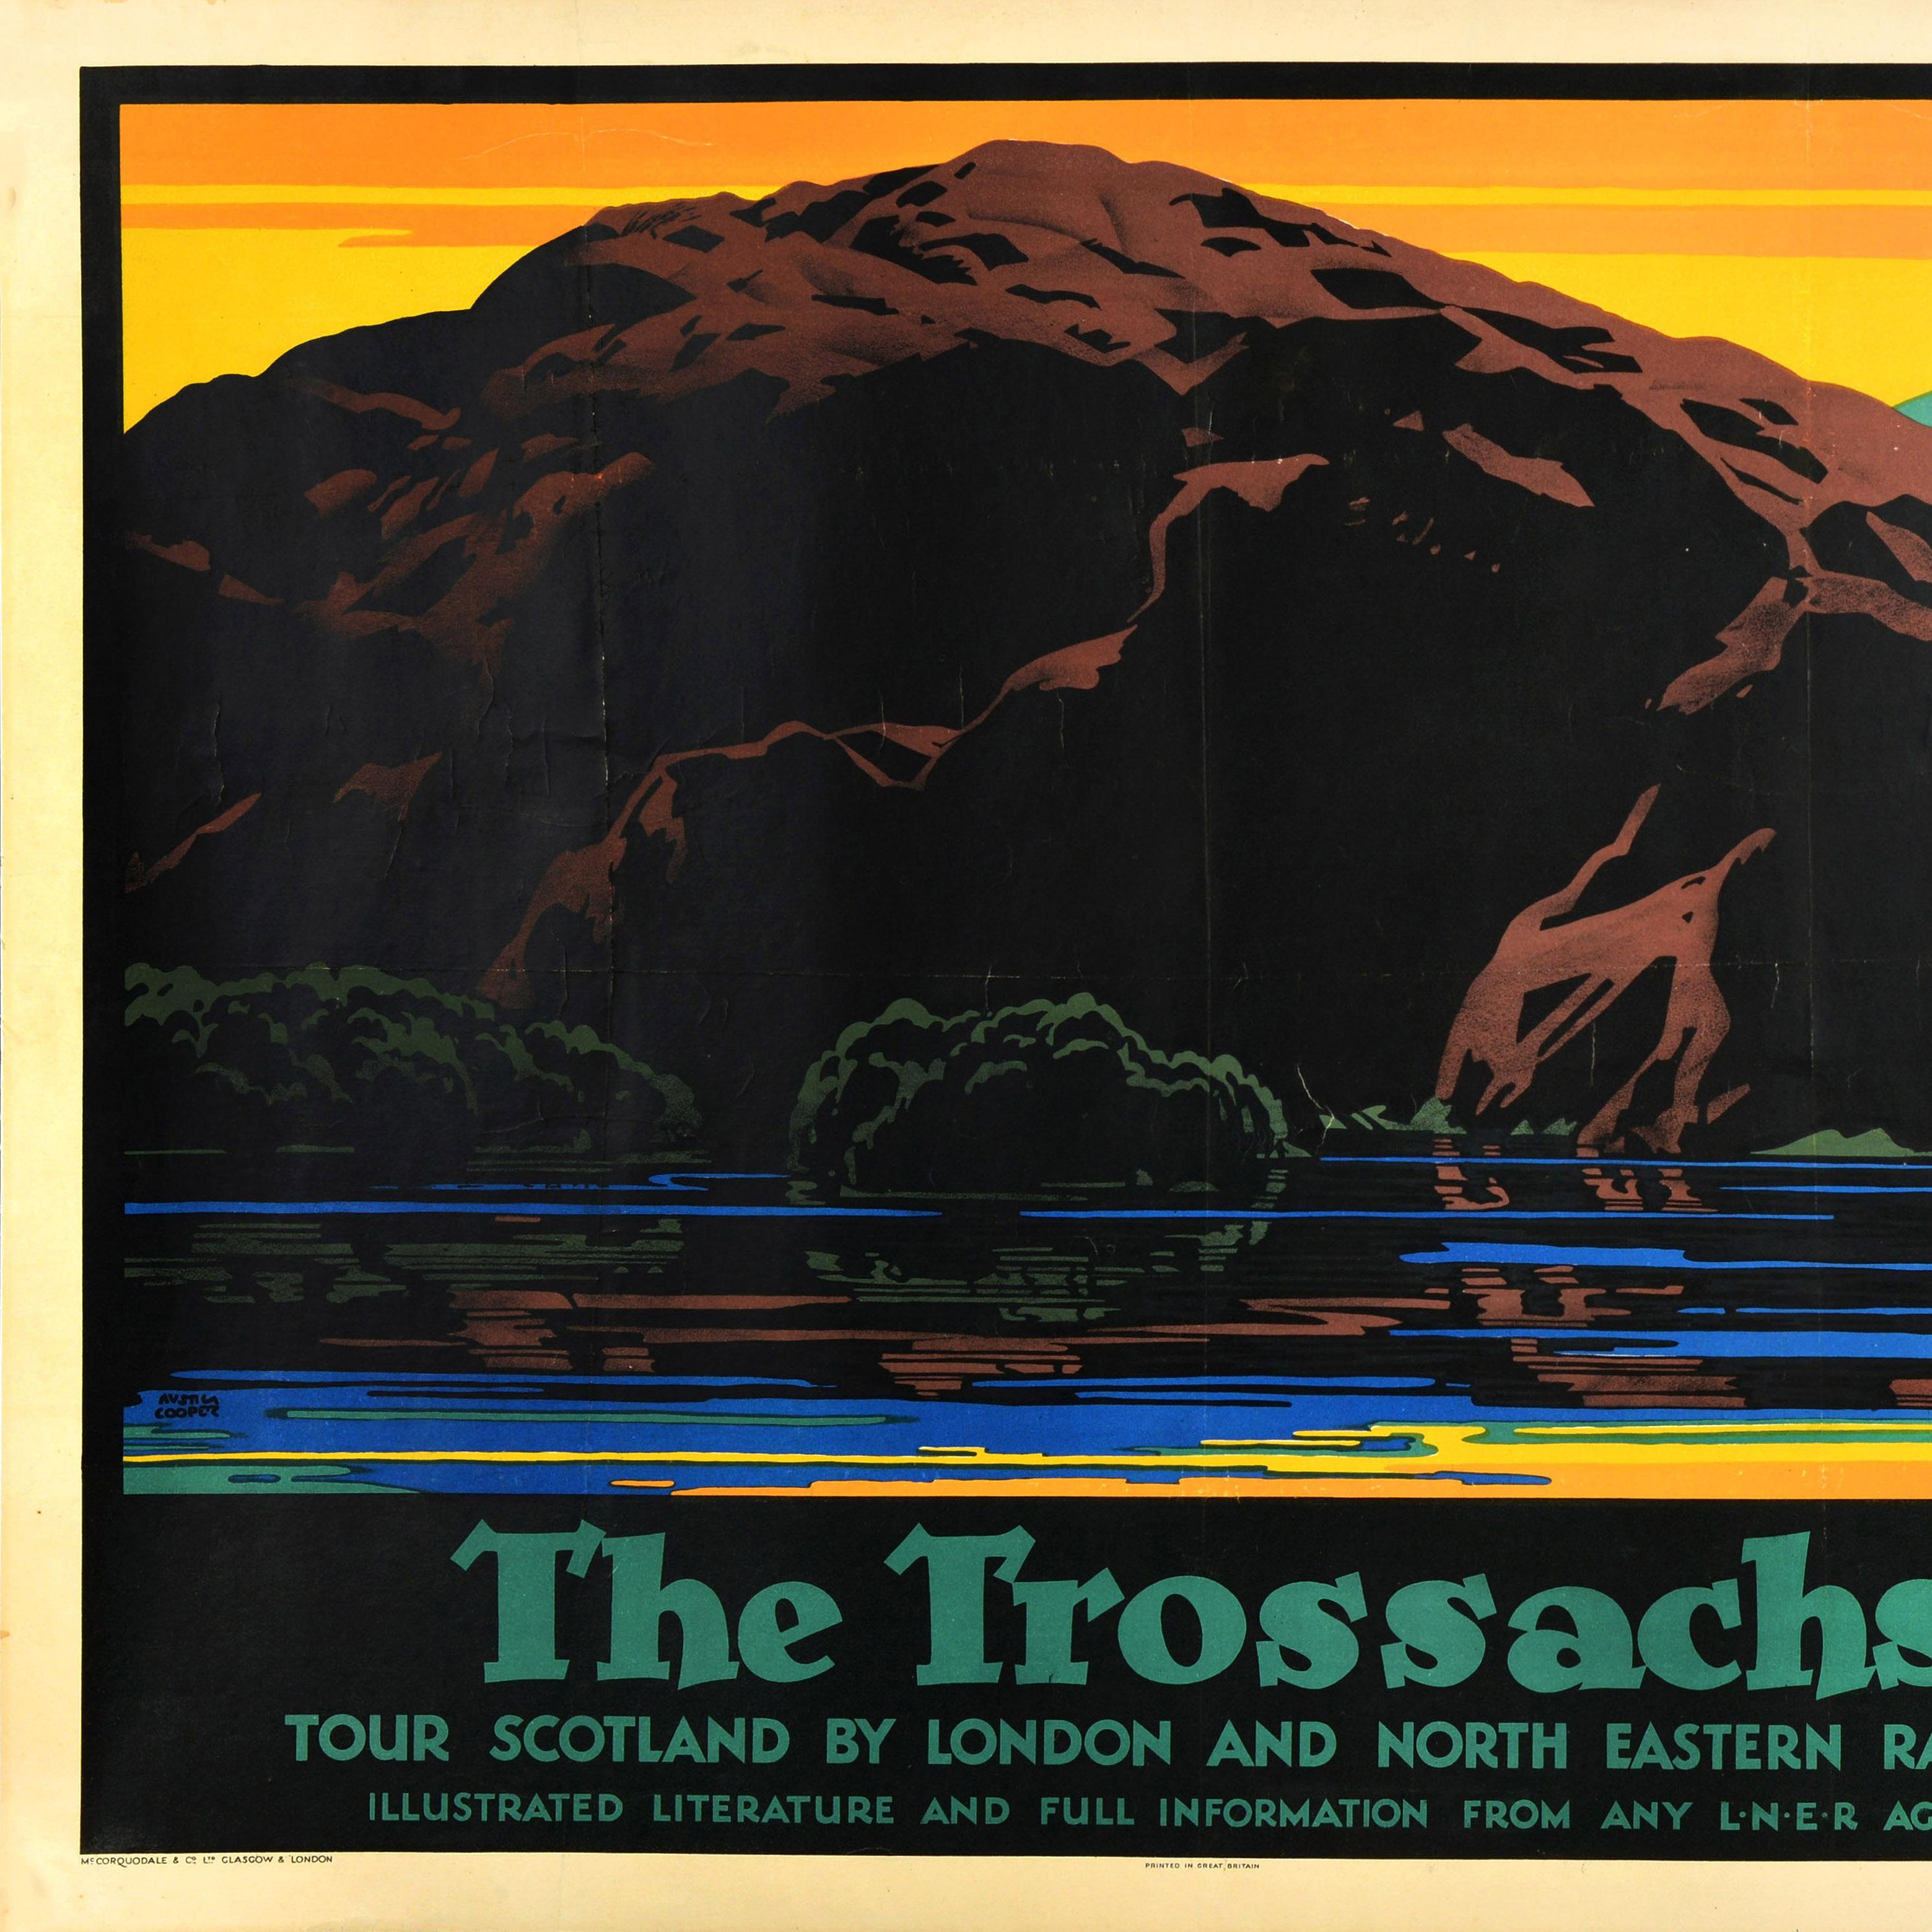 Original vintage LNER train travel poster designed by one of England's leading poster artists Austin Cooper (1890-1964): The Trossachs Tour Scotland by London and North Eastern Railway featuring a stunning image depicting calm lake water reflecting